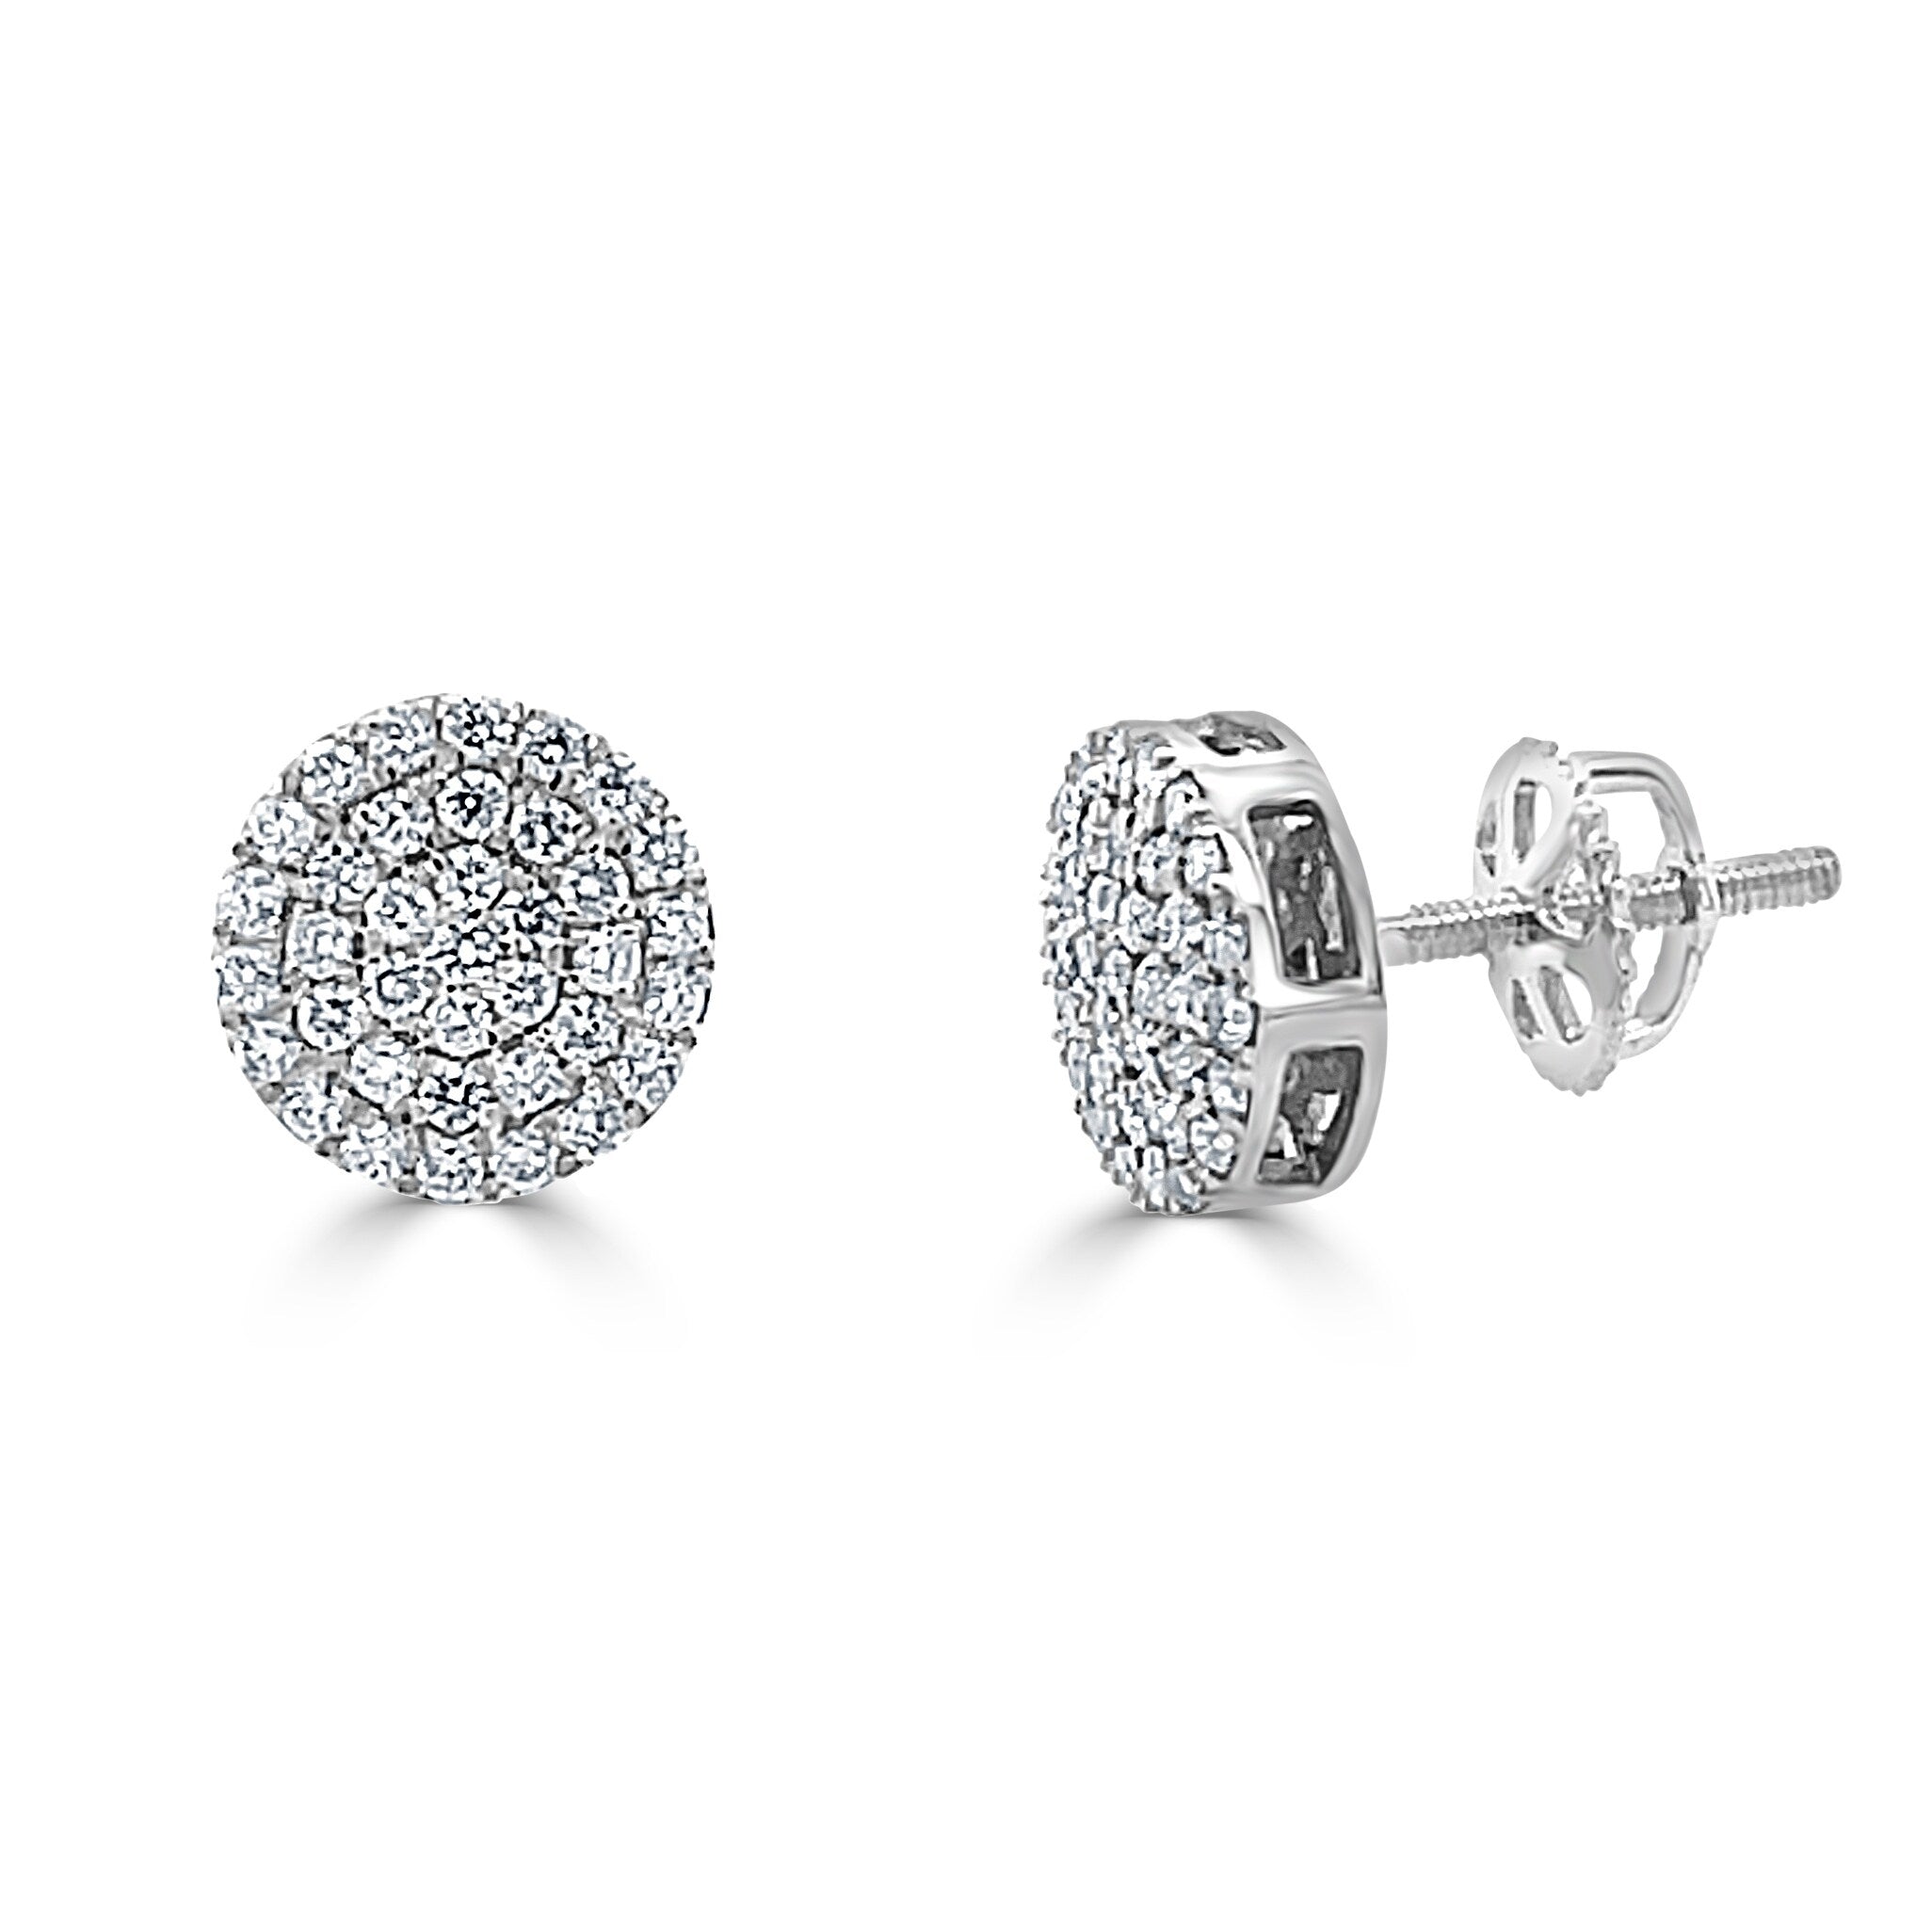 Joelle Round Diamond Stud Earrings For Her - 14k Gold 1/3 CTTW Round P ...